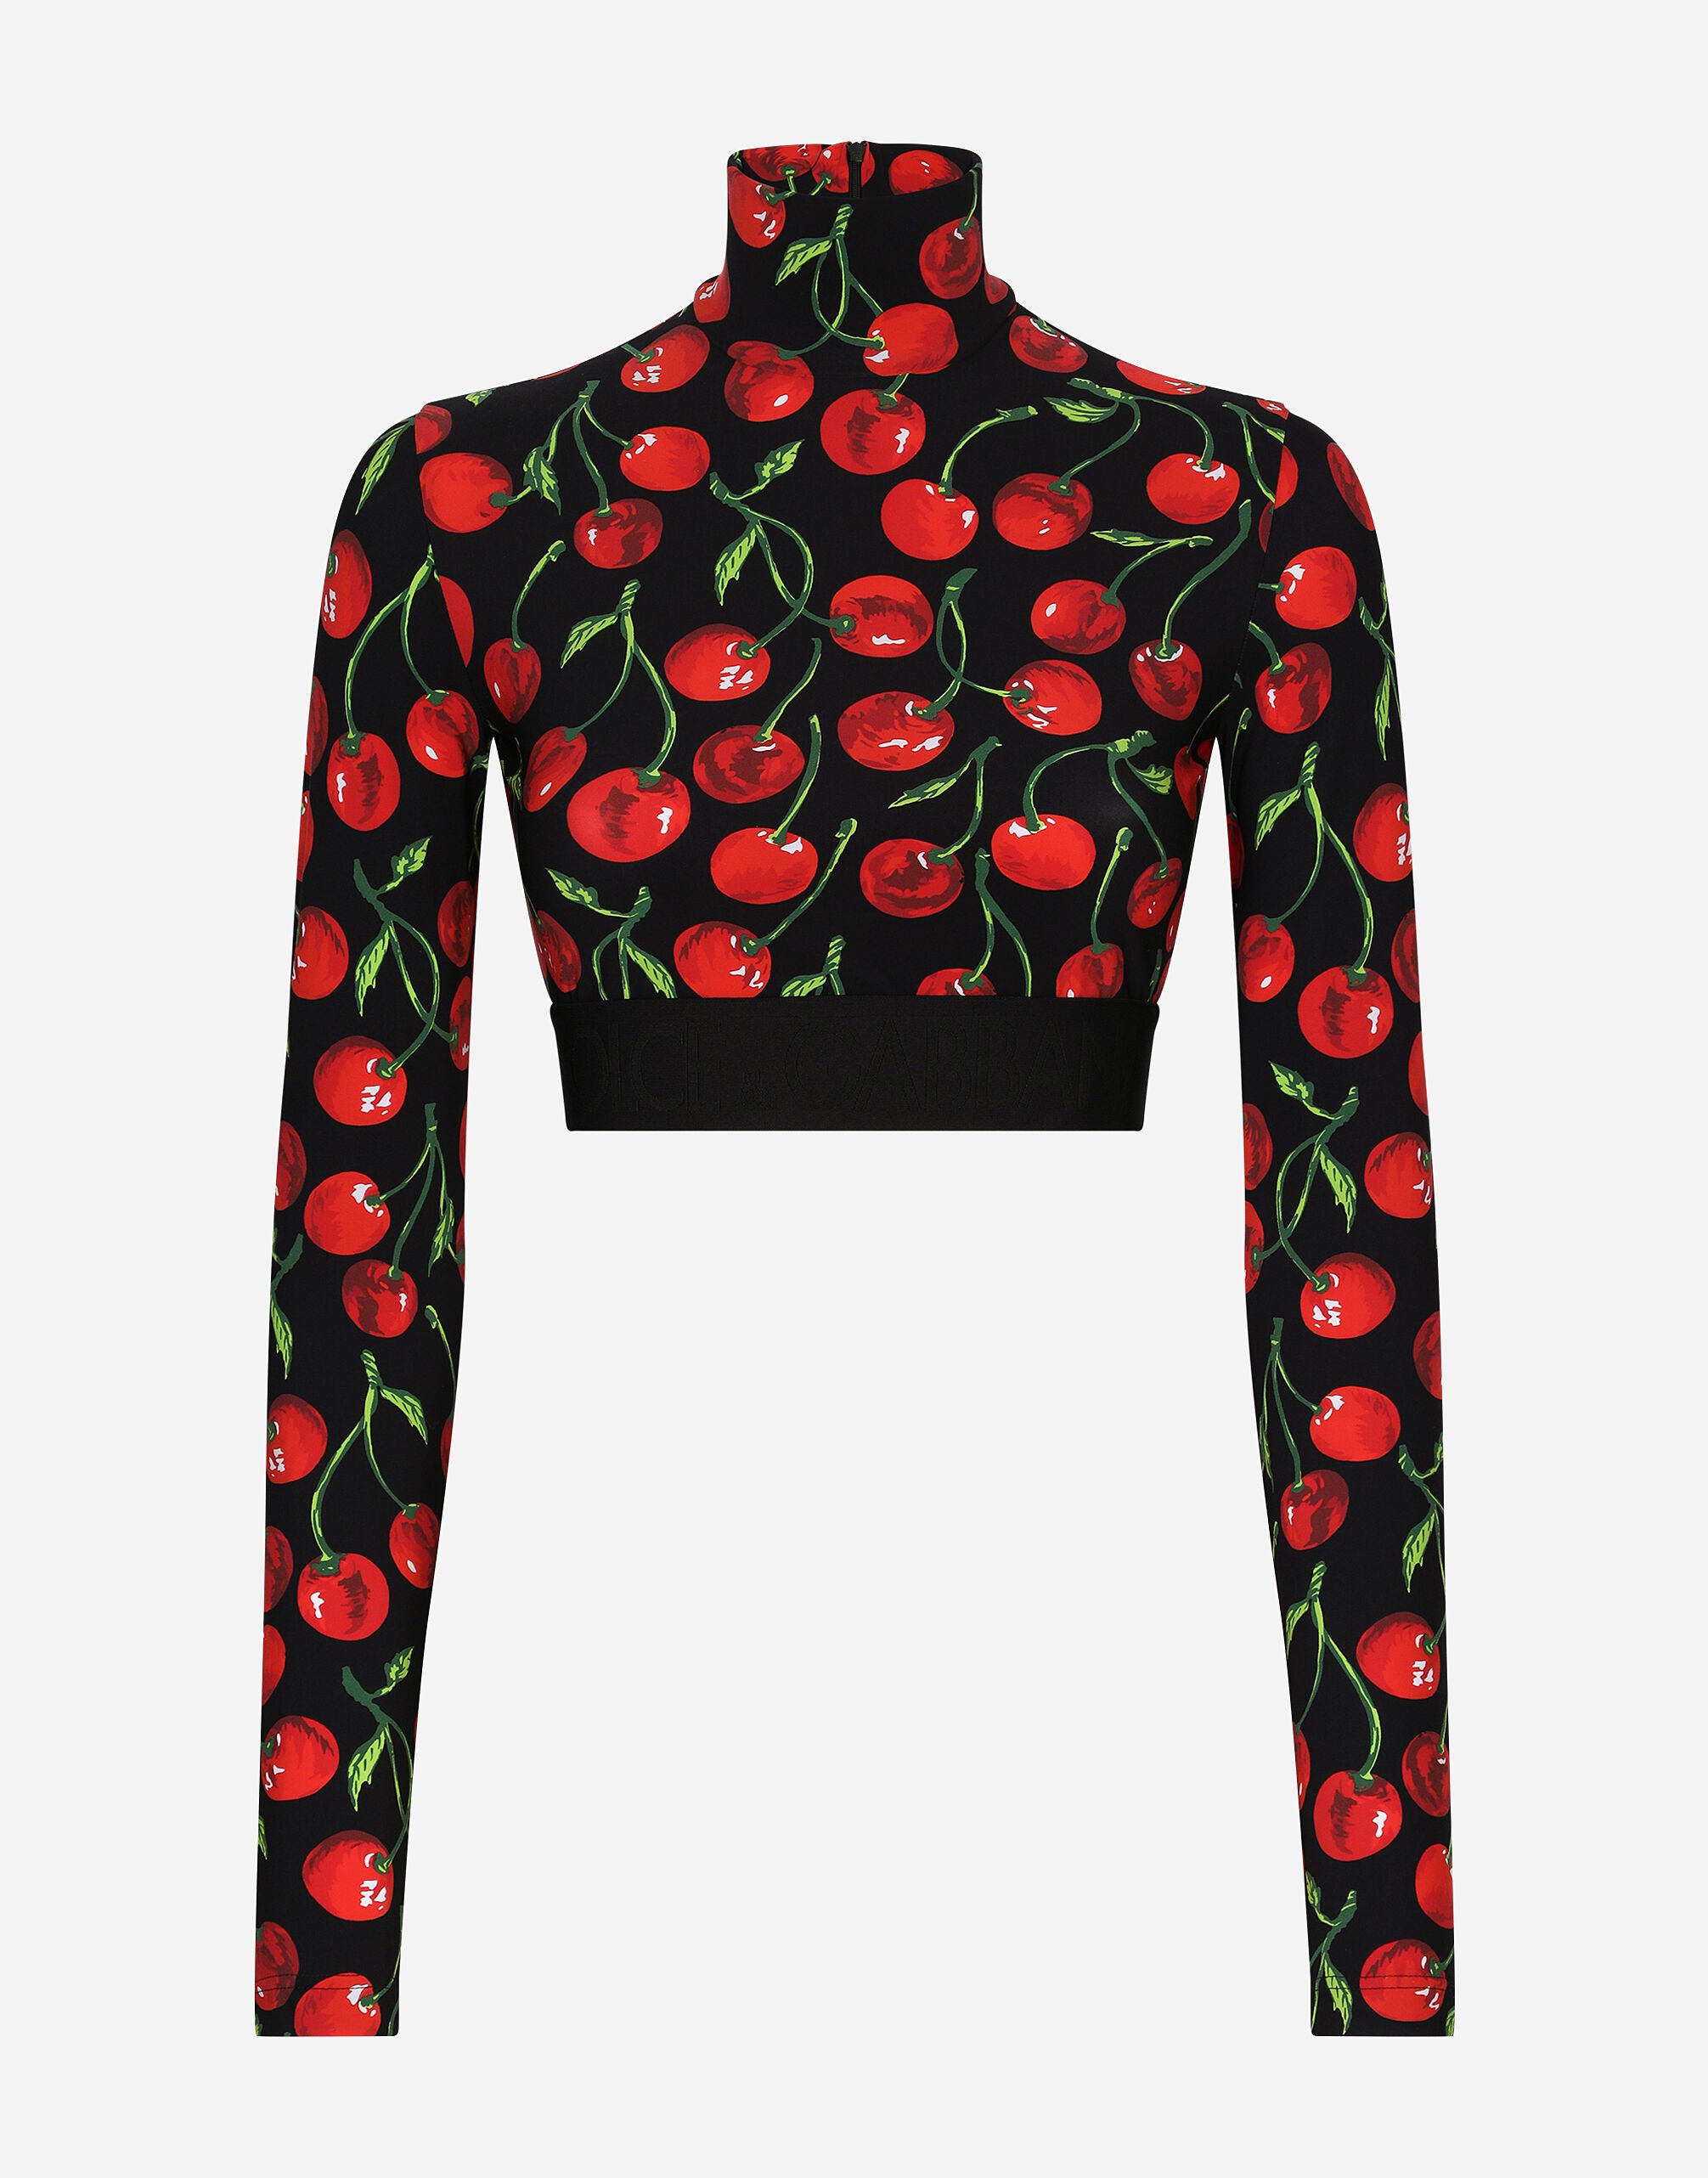 Dolce & Gabbana Cherry-print technical jersey turtle-neck top with branded elastic Black VG6186VN187